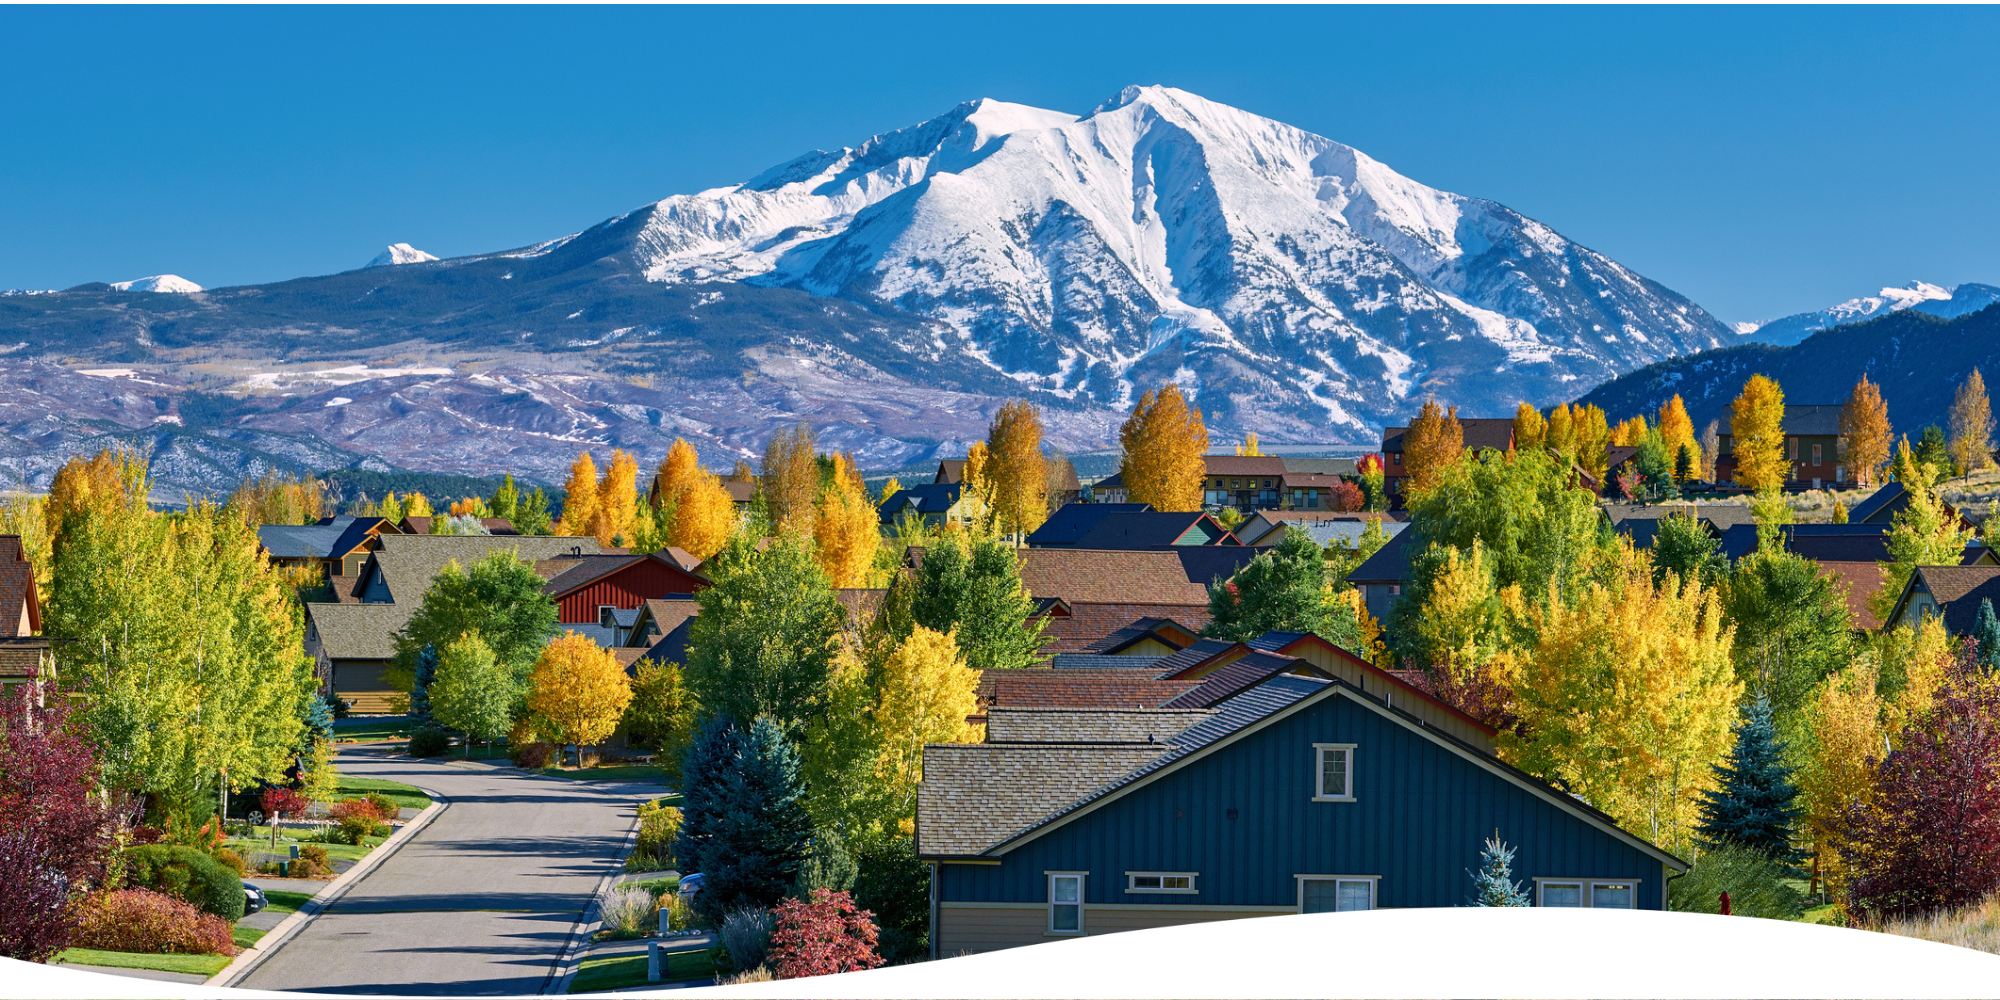 Colorado Renters Insurance: What You Need to Know